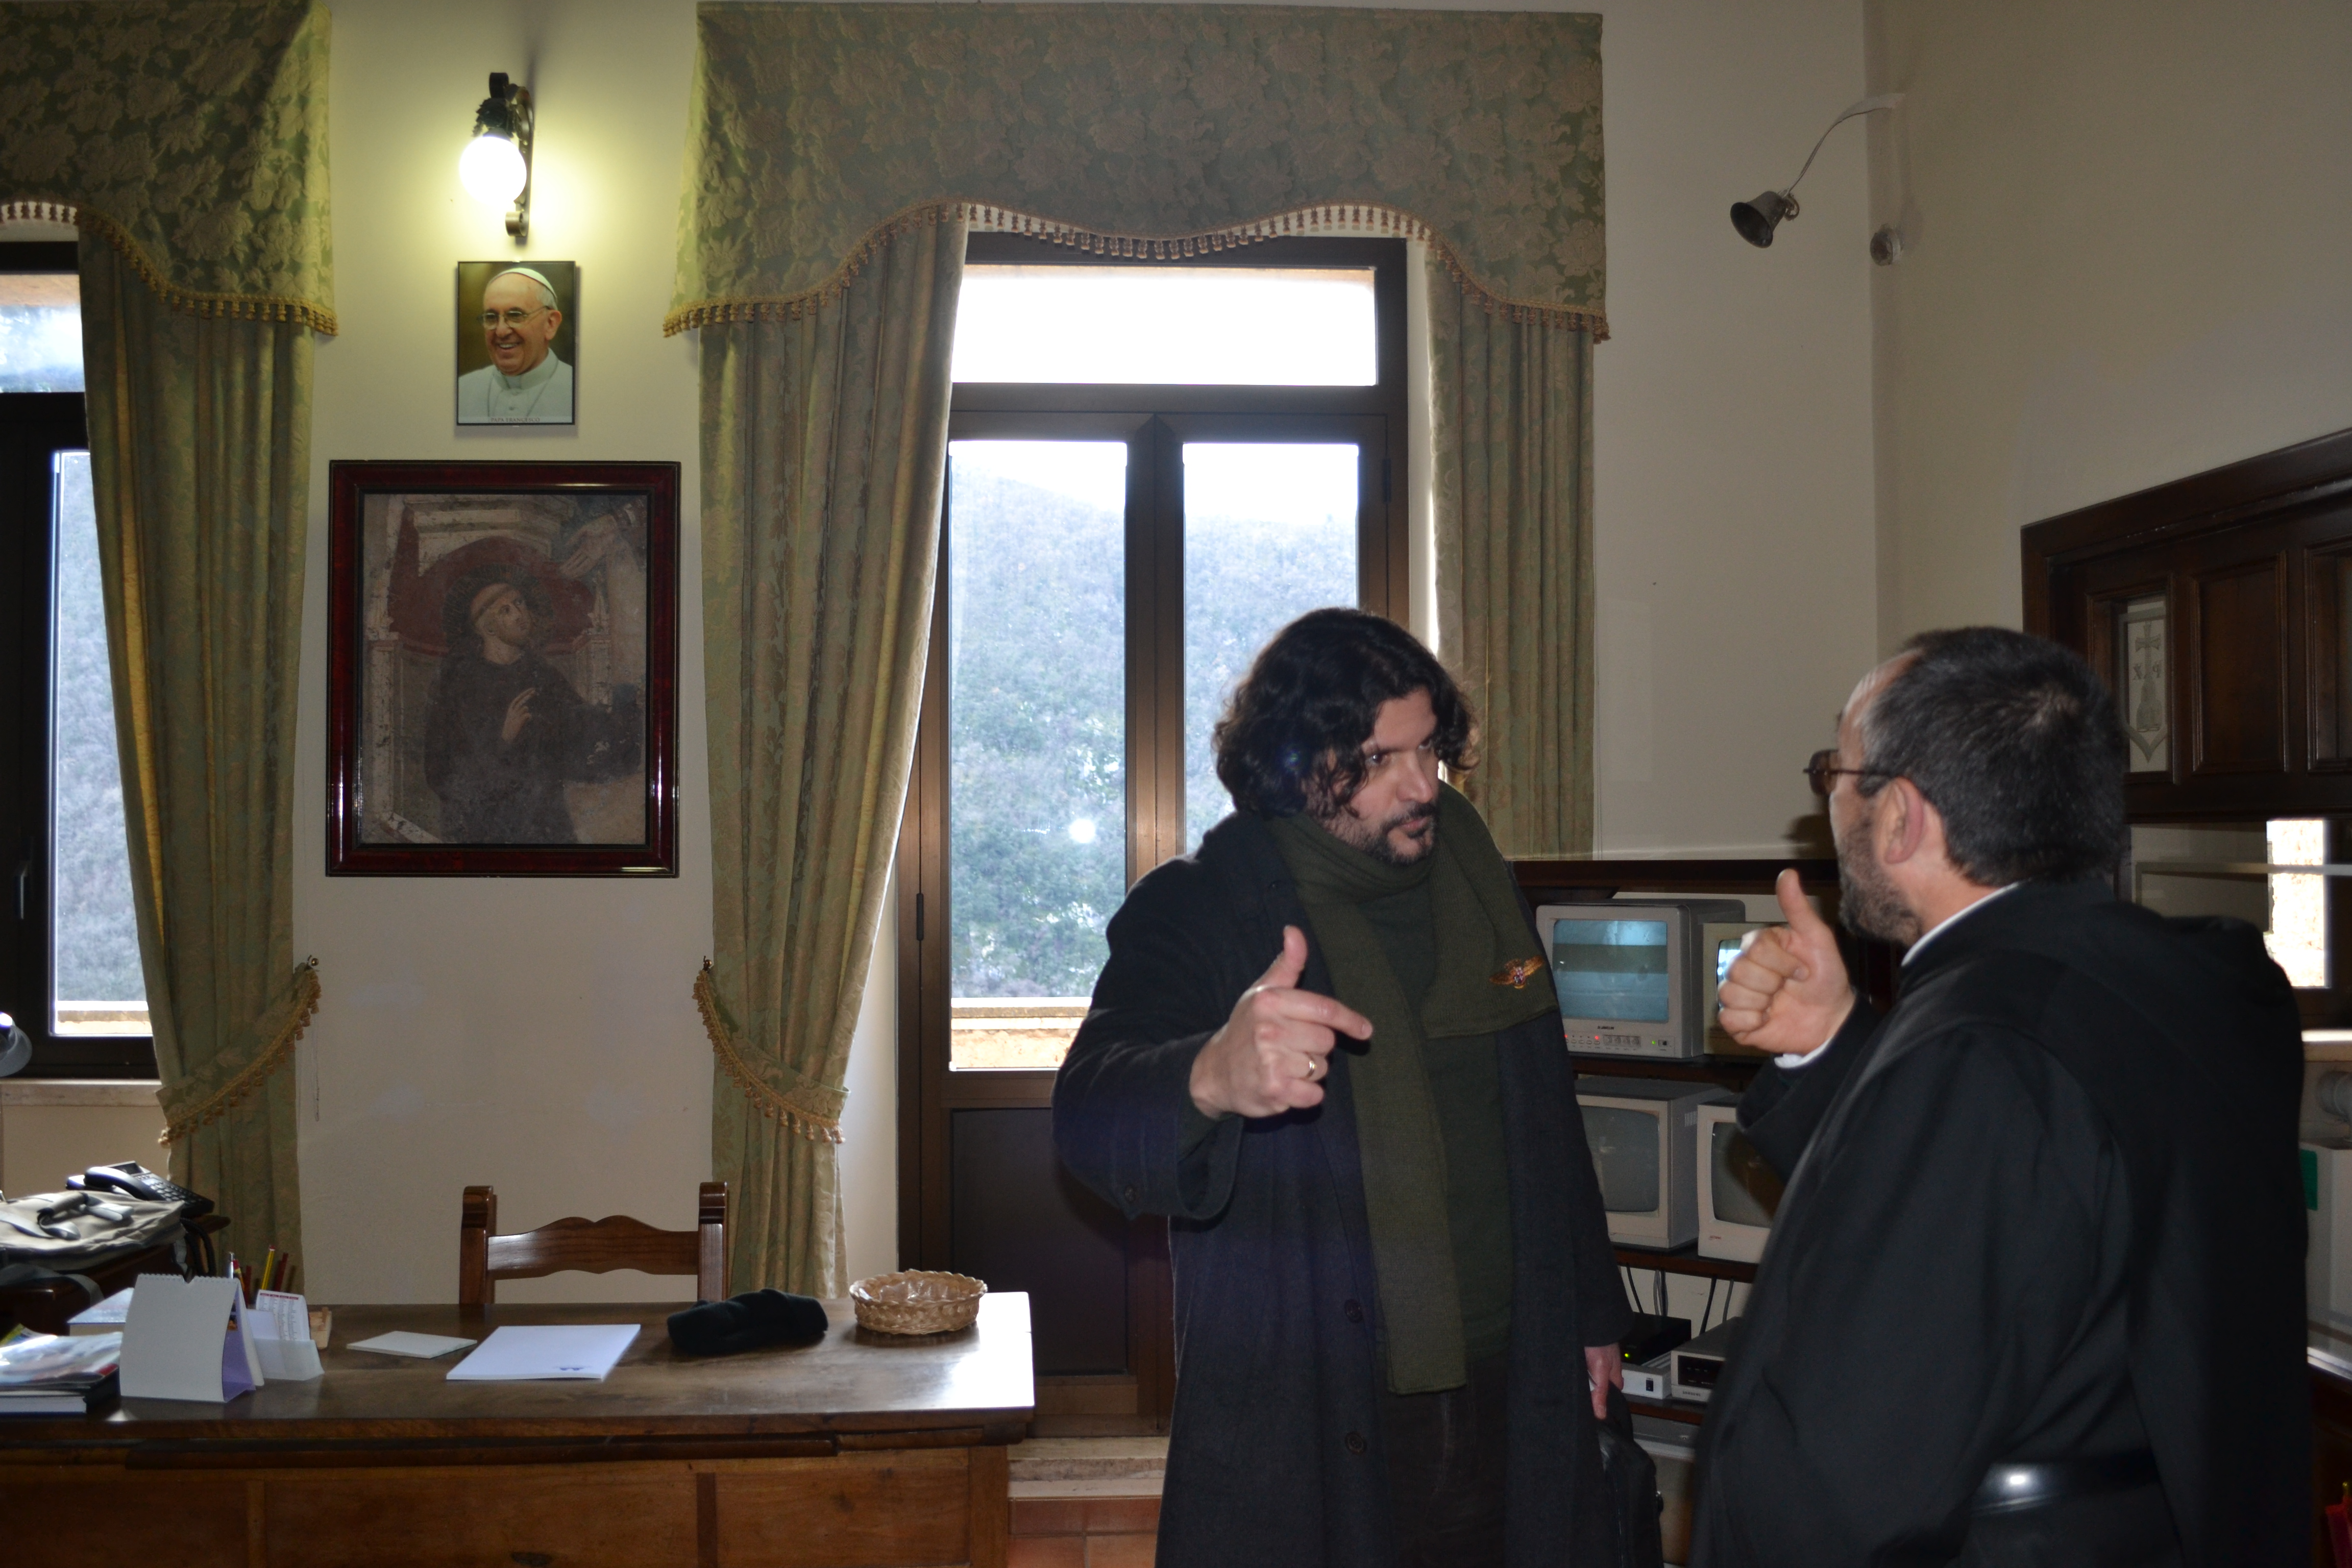 Monastery of St. Bnedict in Subiaco (Rome). To discuss of the new project St. Benedict, the Man of God.